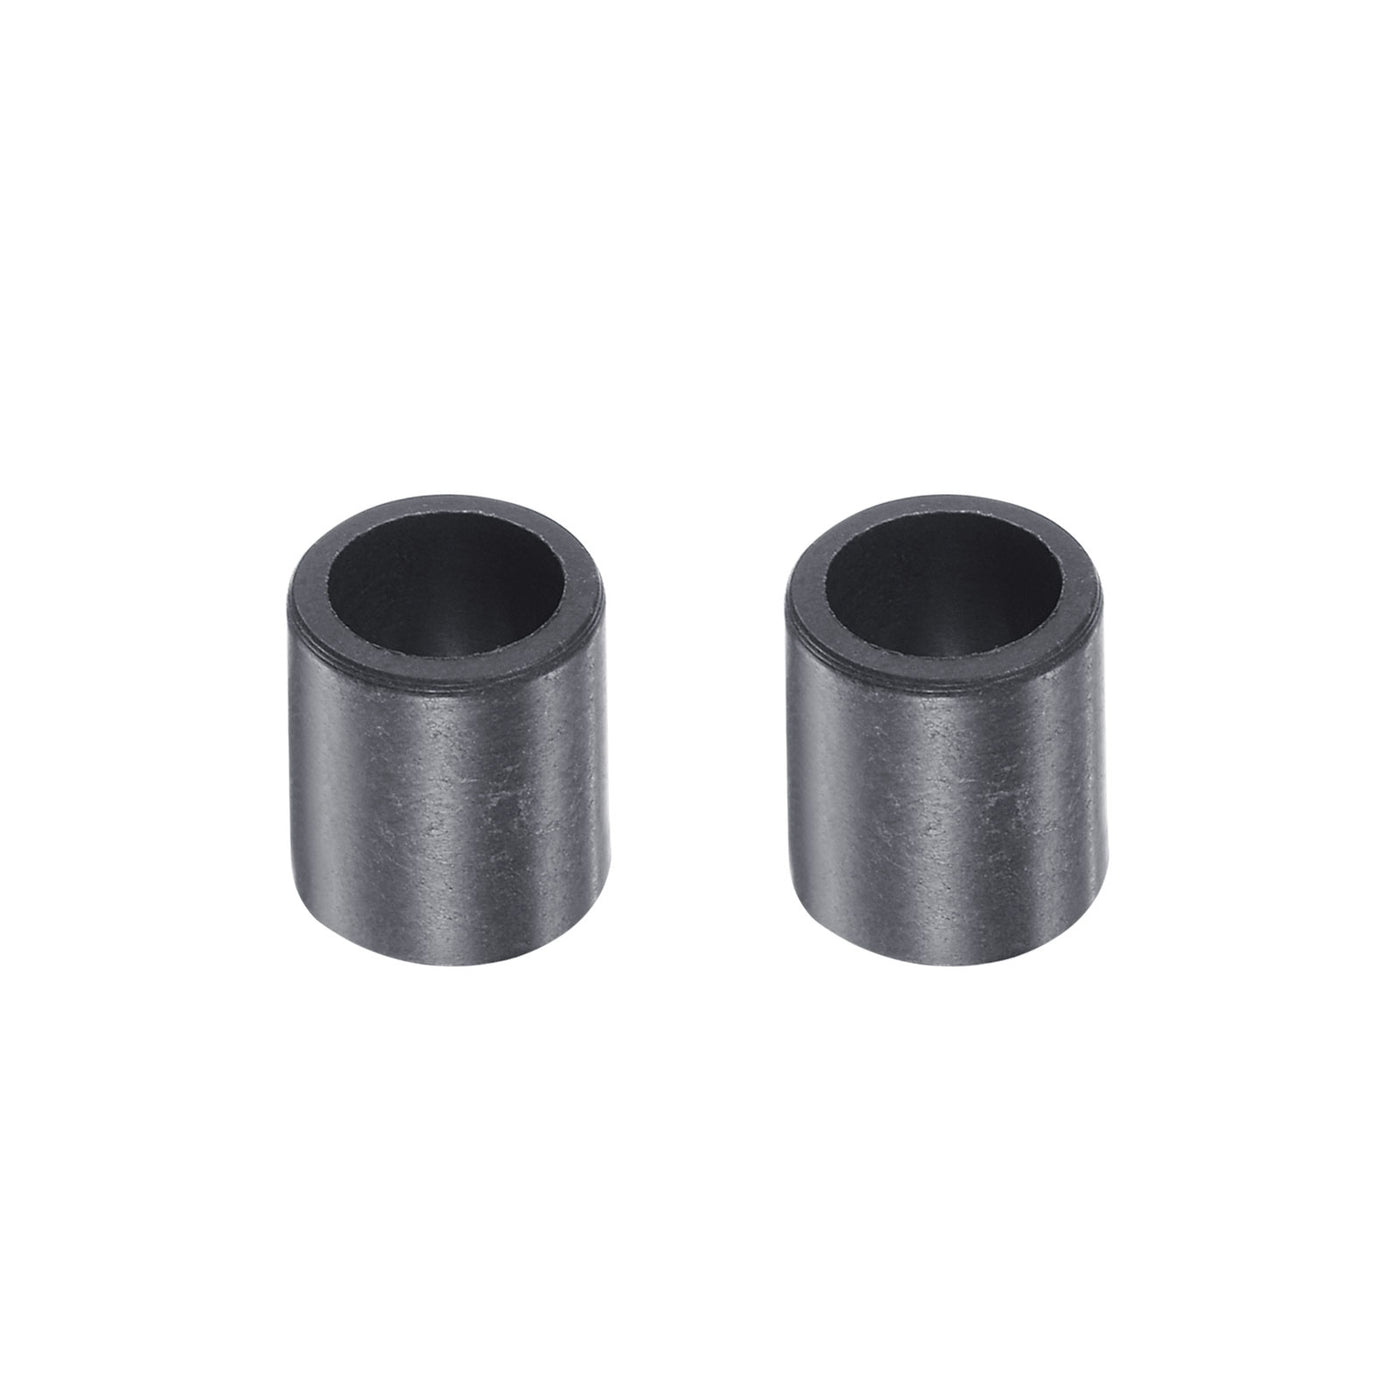 uxcell Uxcell Sleeve Bearings 5mmx7mmx8mm POM Wrapped Oilless Bushings Black 2pcs